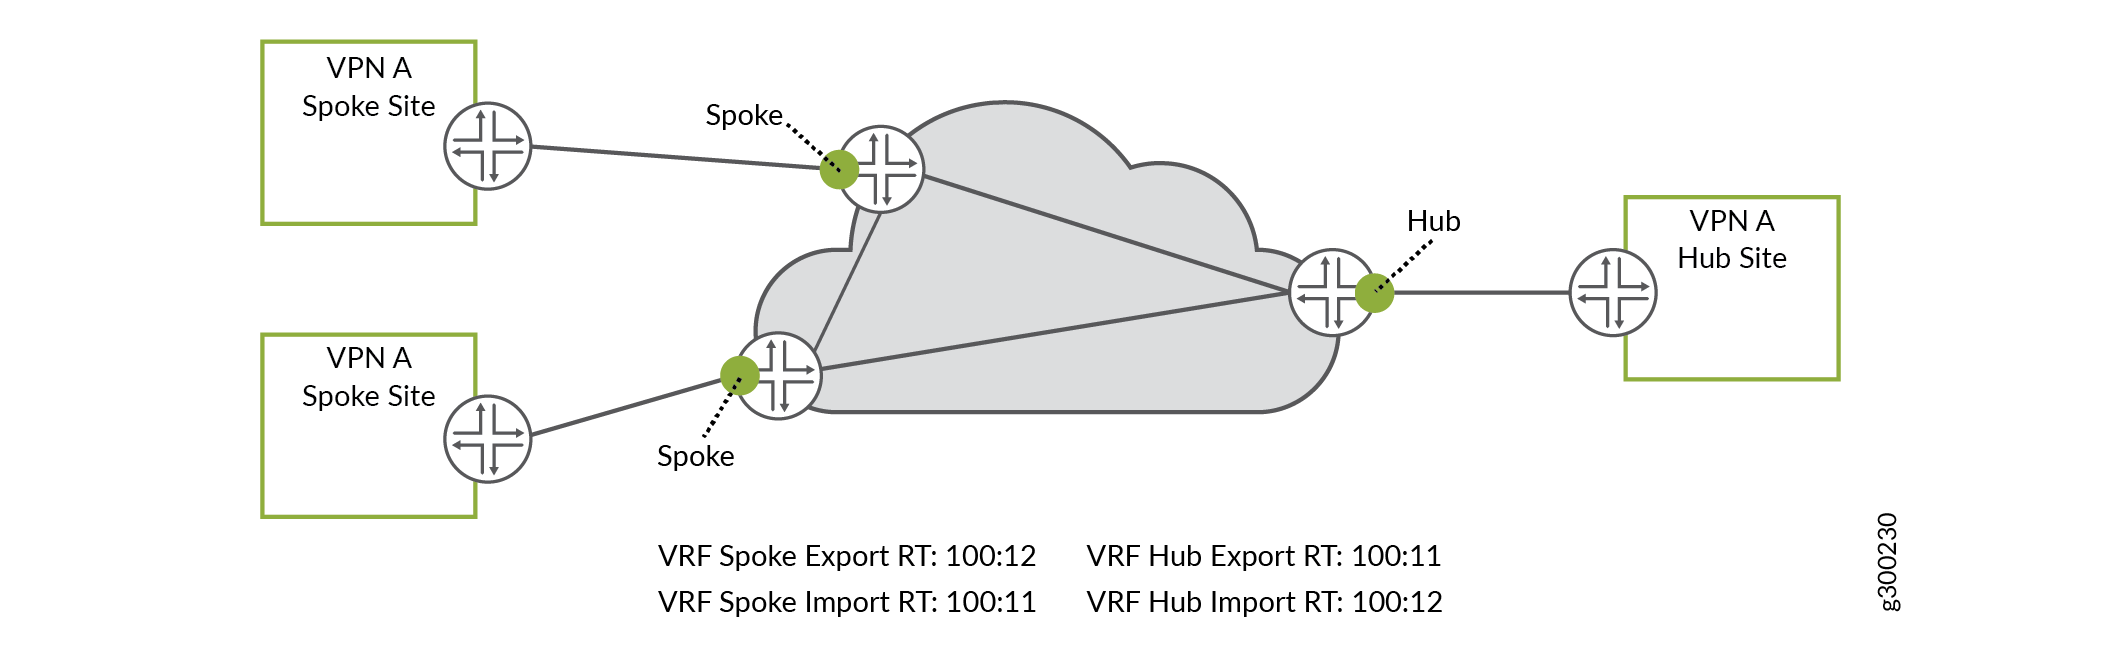 Route Separation Example - Hub-and-Spoke MPLS VPN